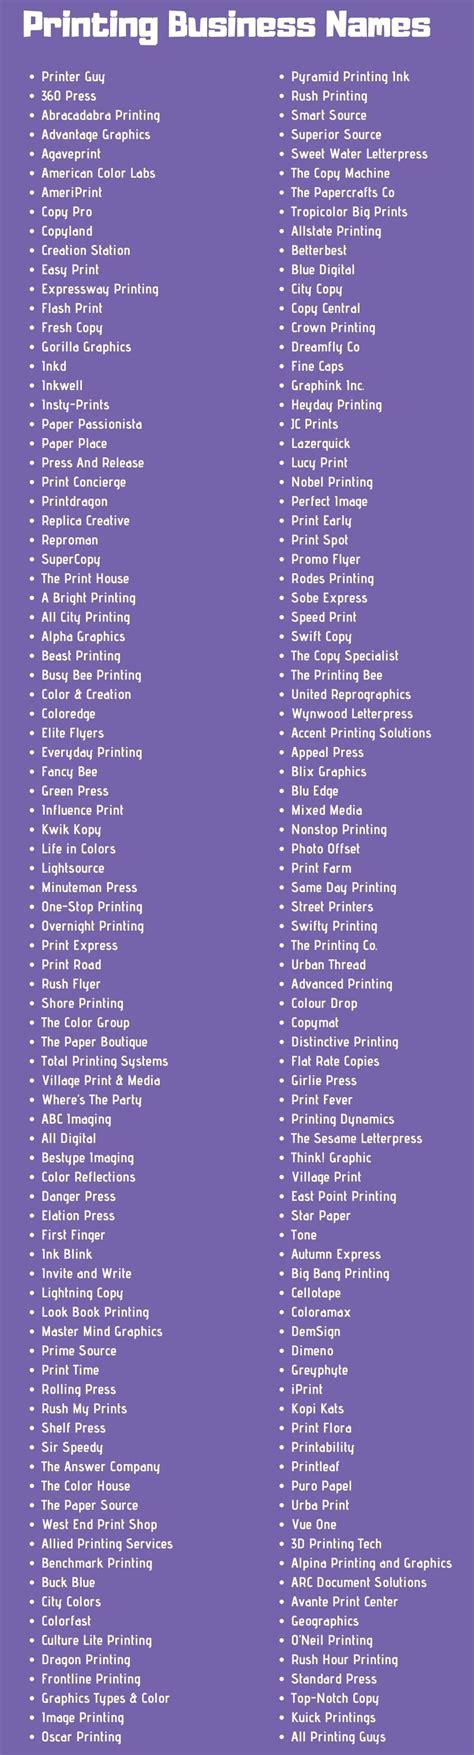 Creative Business Names List Cute Business Names Catchy Business Name